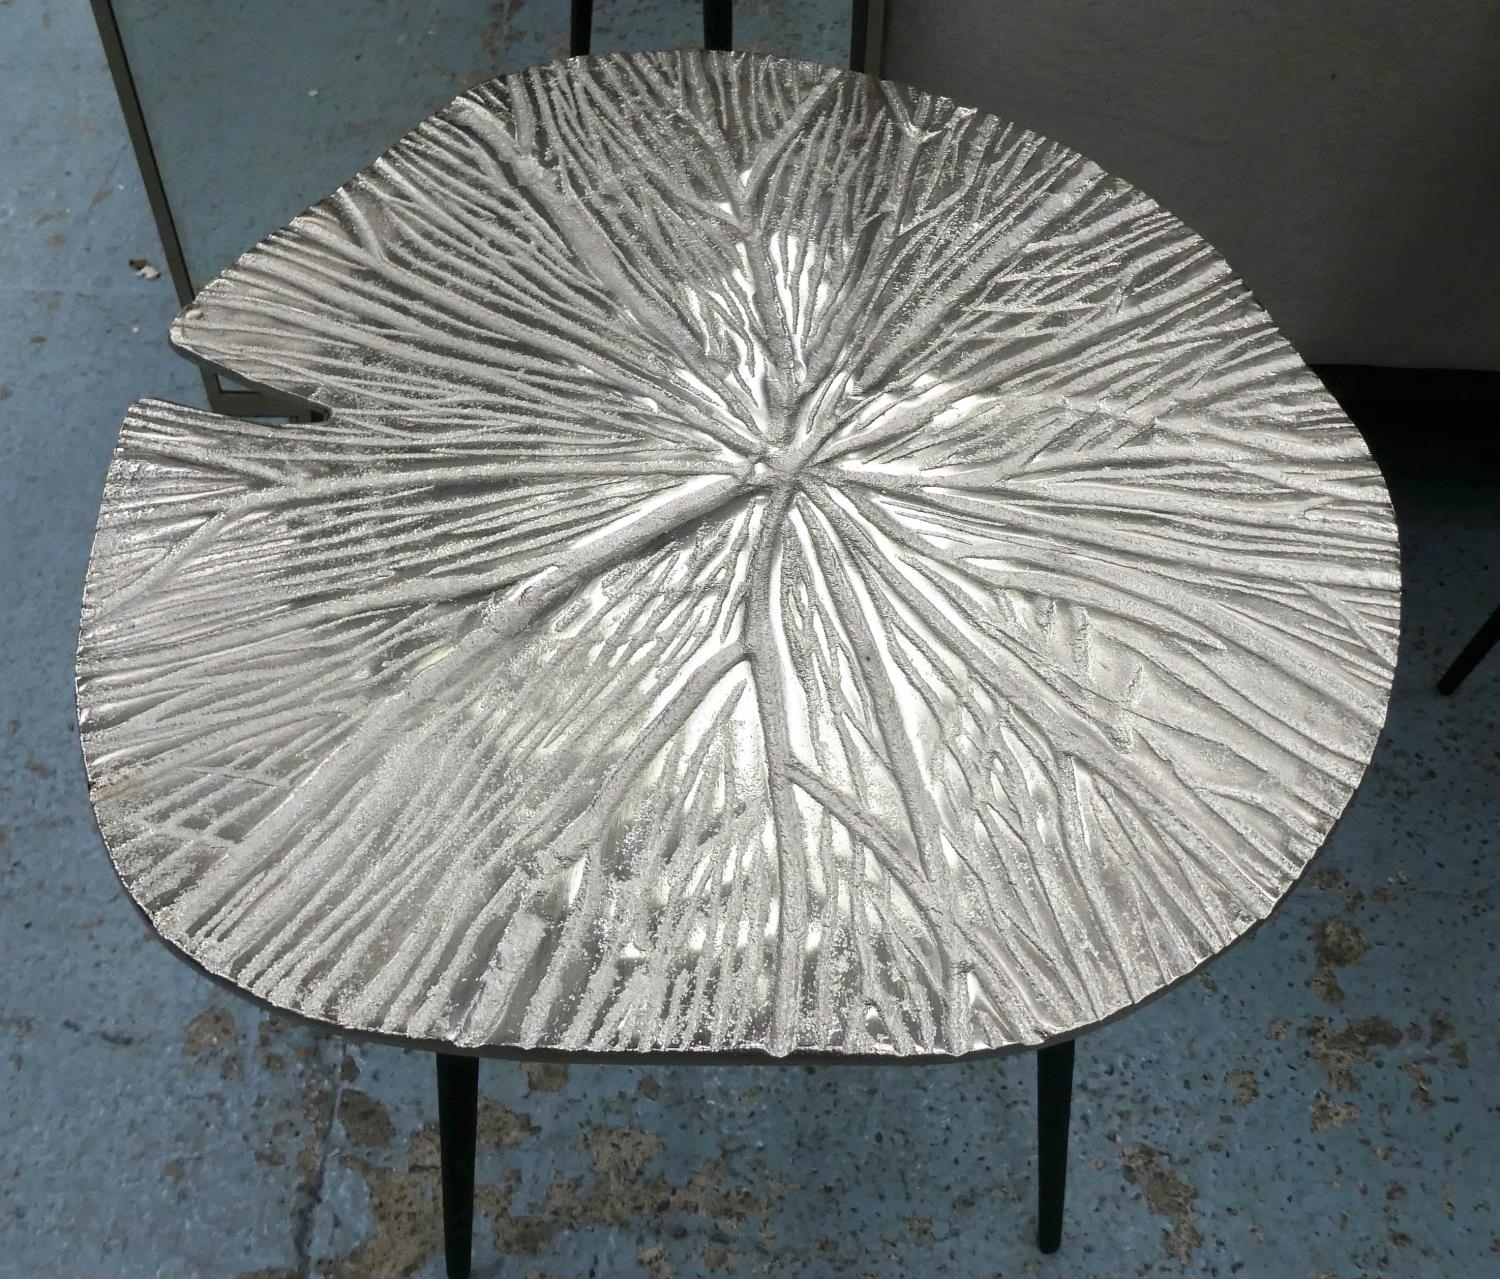 LILY PAD SIDE TABLES, a pair, graduated pair, 49cm x 53cm x 54cm at largest, polished metal tops. ( - Image 2 of 3